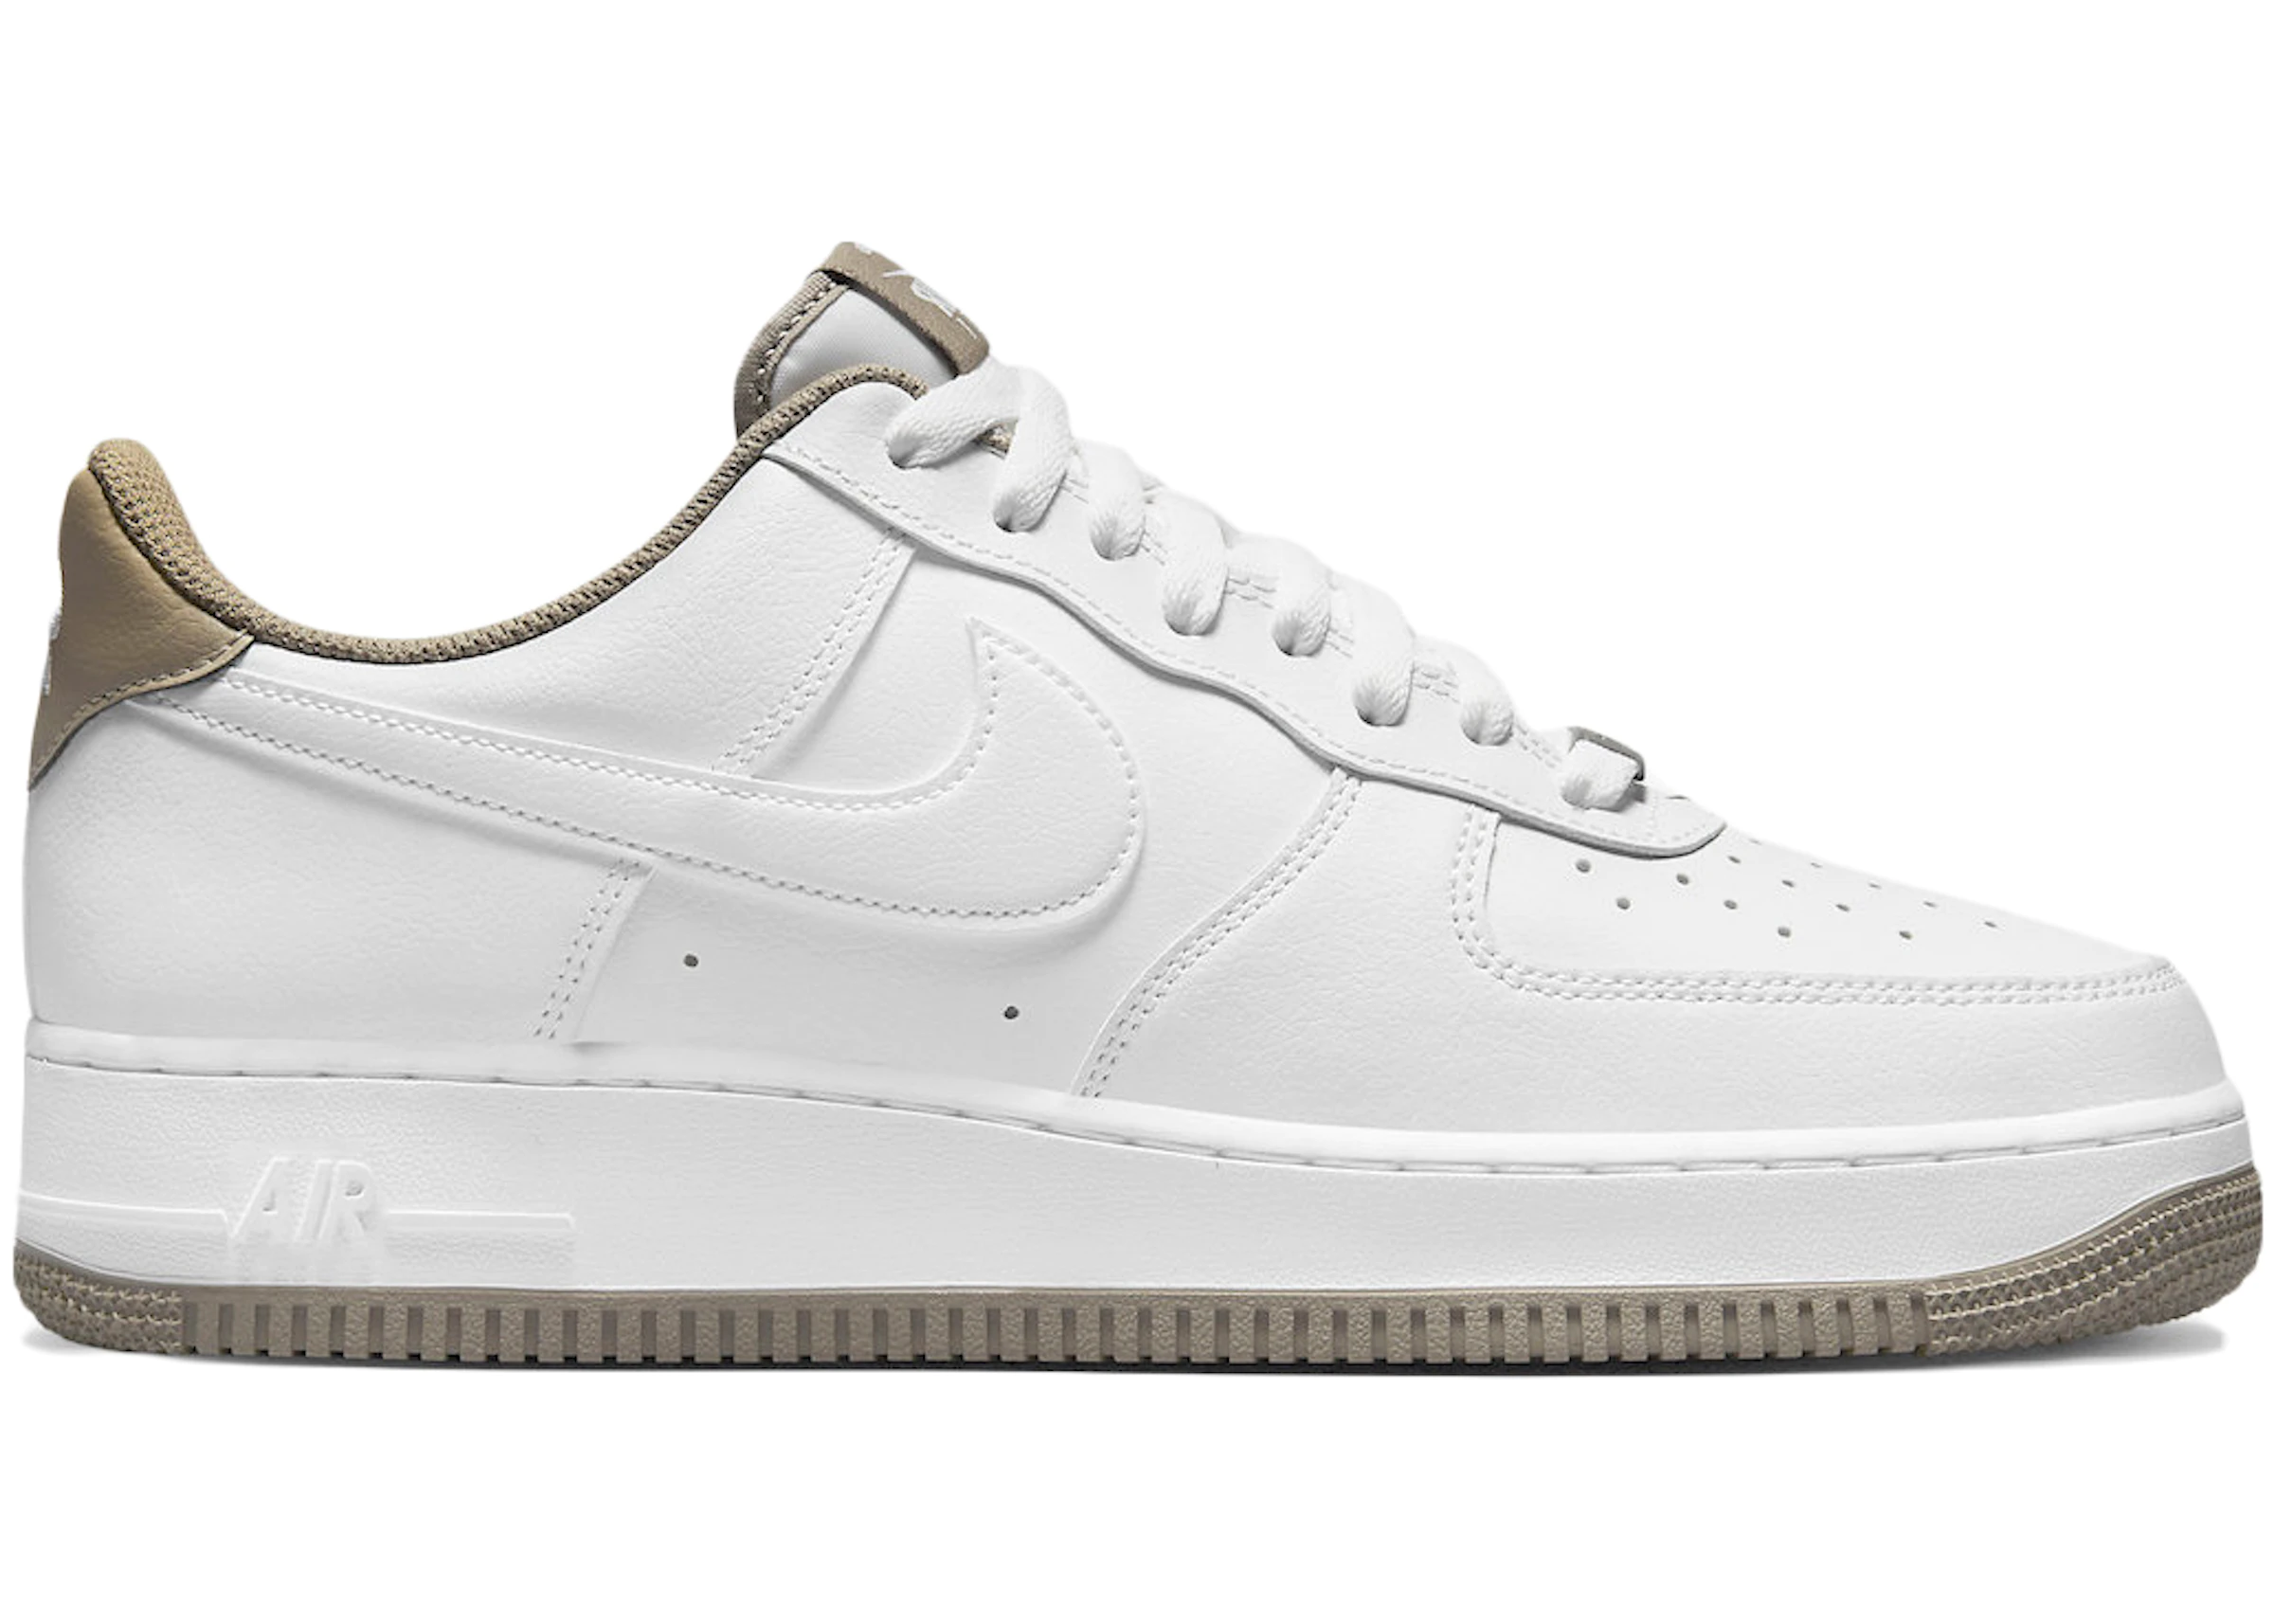 Loved one Cardinal puff Nike Air Force 1 Low White Khaki (2022) - DR9867-100 - US